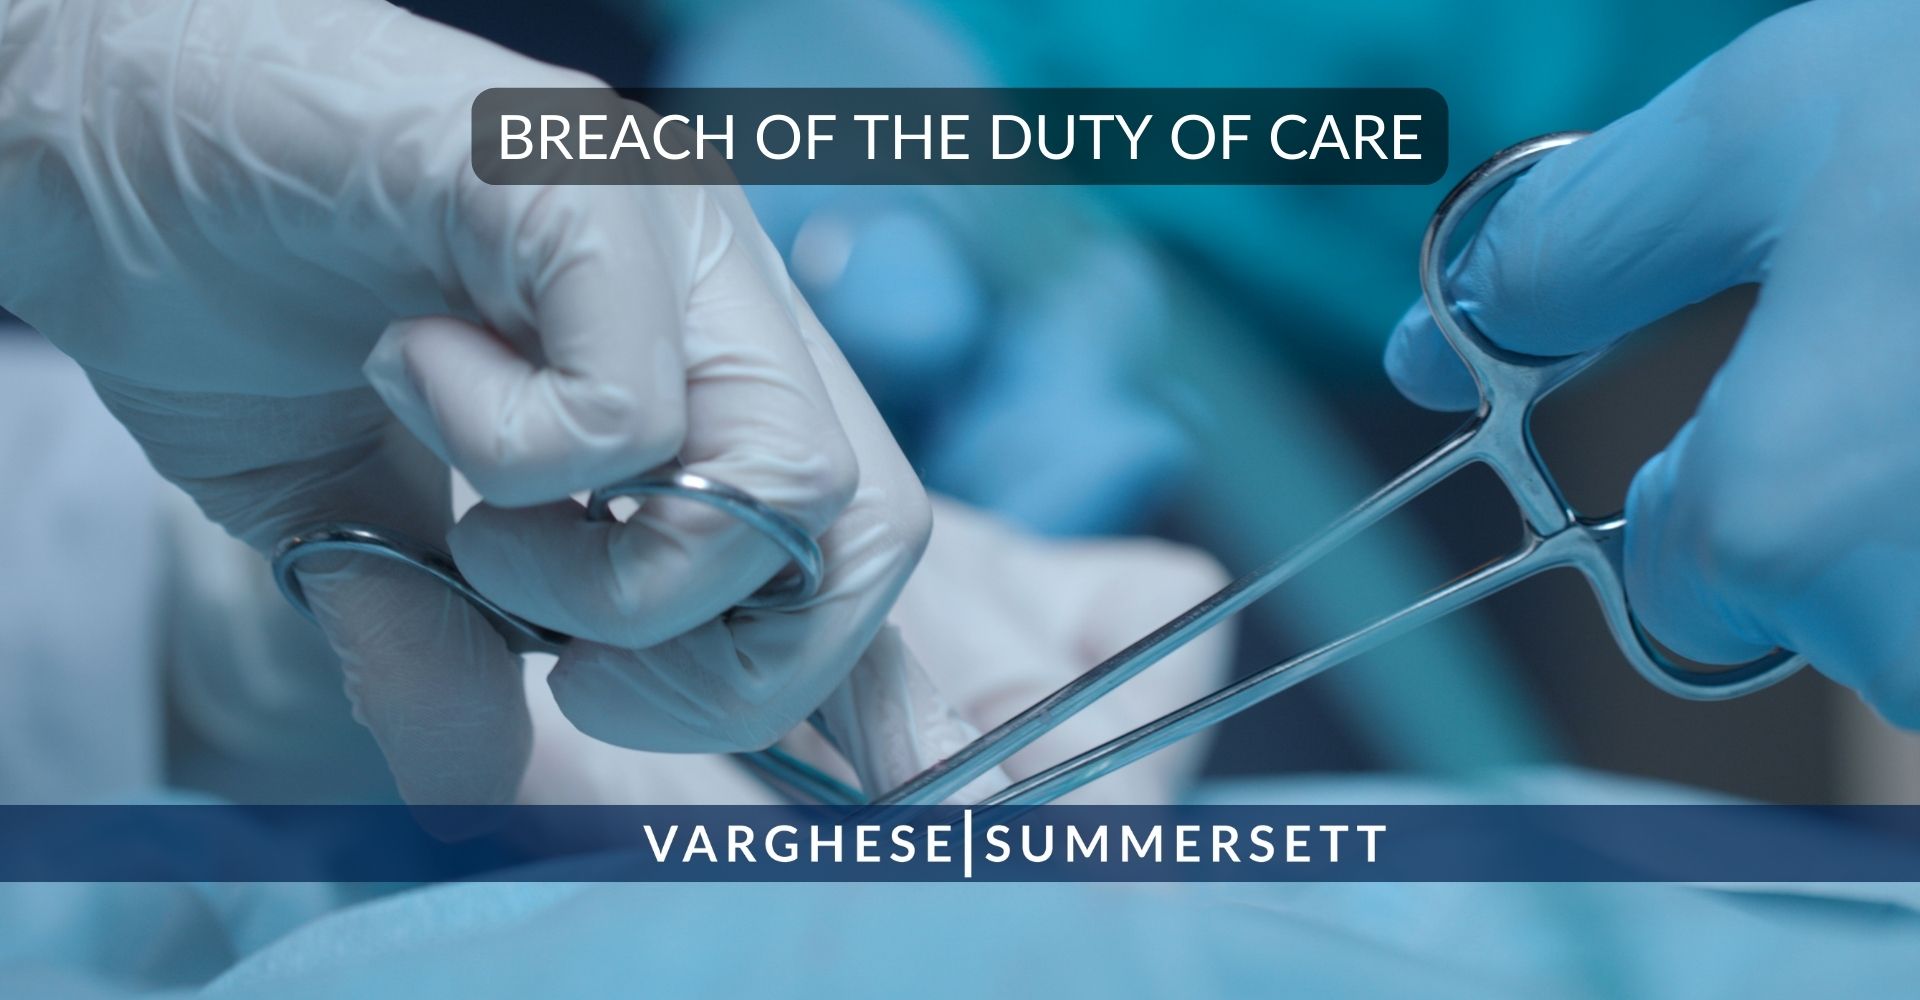 Breach of the Duty of Care